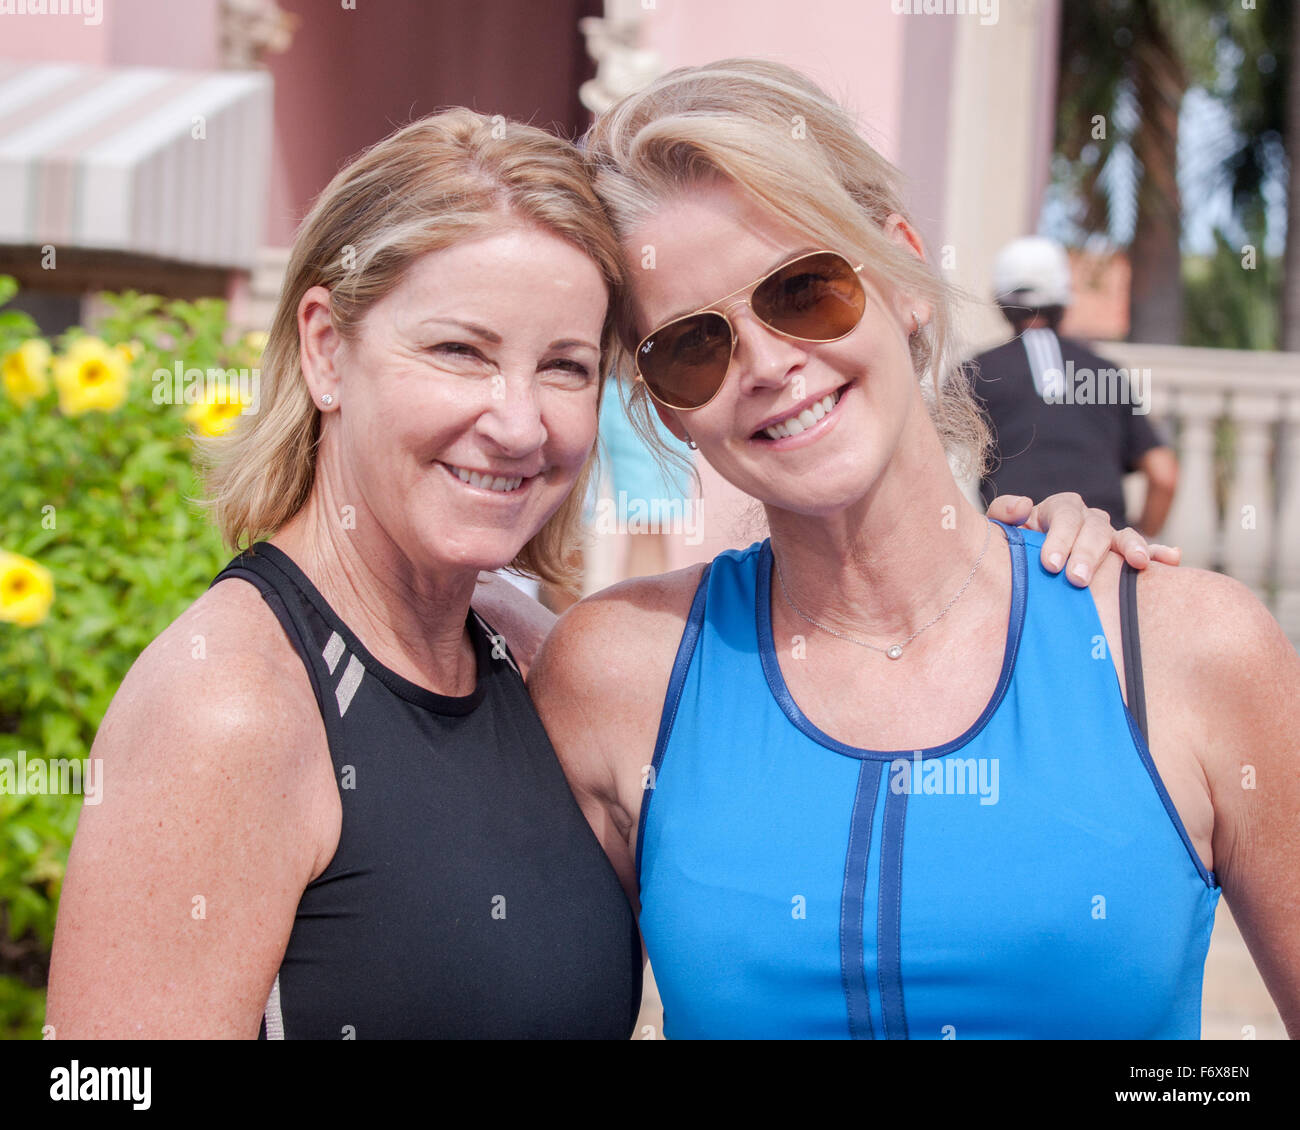 Boca Raton, Florida, US. 20th Nov, 2015. Tennis legend Chris Evert and Maeve Quinlan, actress and former professional tennis player, best known for starring in The Bold and the Beautiful, during media day at 26th Annual Chris Evert/Raymond James Pro-Celebrity Tennis Classic at the Boca Raton Resort & Club in Florida. Chris Evert Charities has raised almost $ 22 million for Florida's most at-risk children Credit:  Arnold Drapkin/ZUMA Wire/Alamy Live News Stock Photo